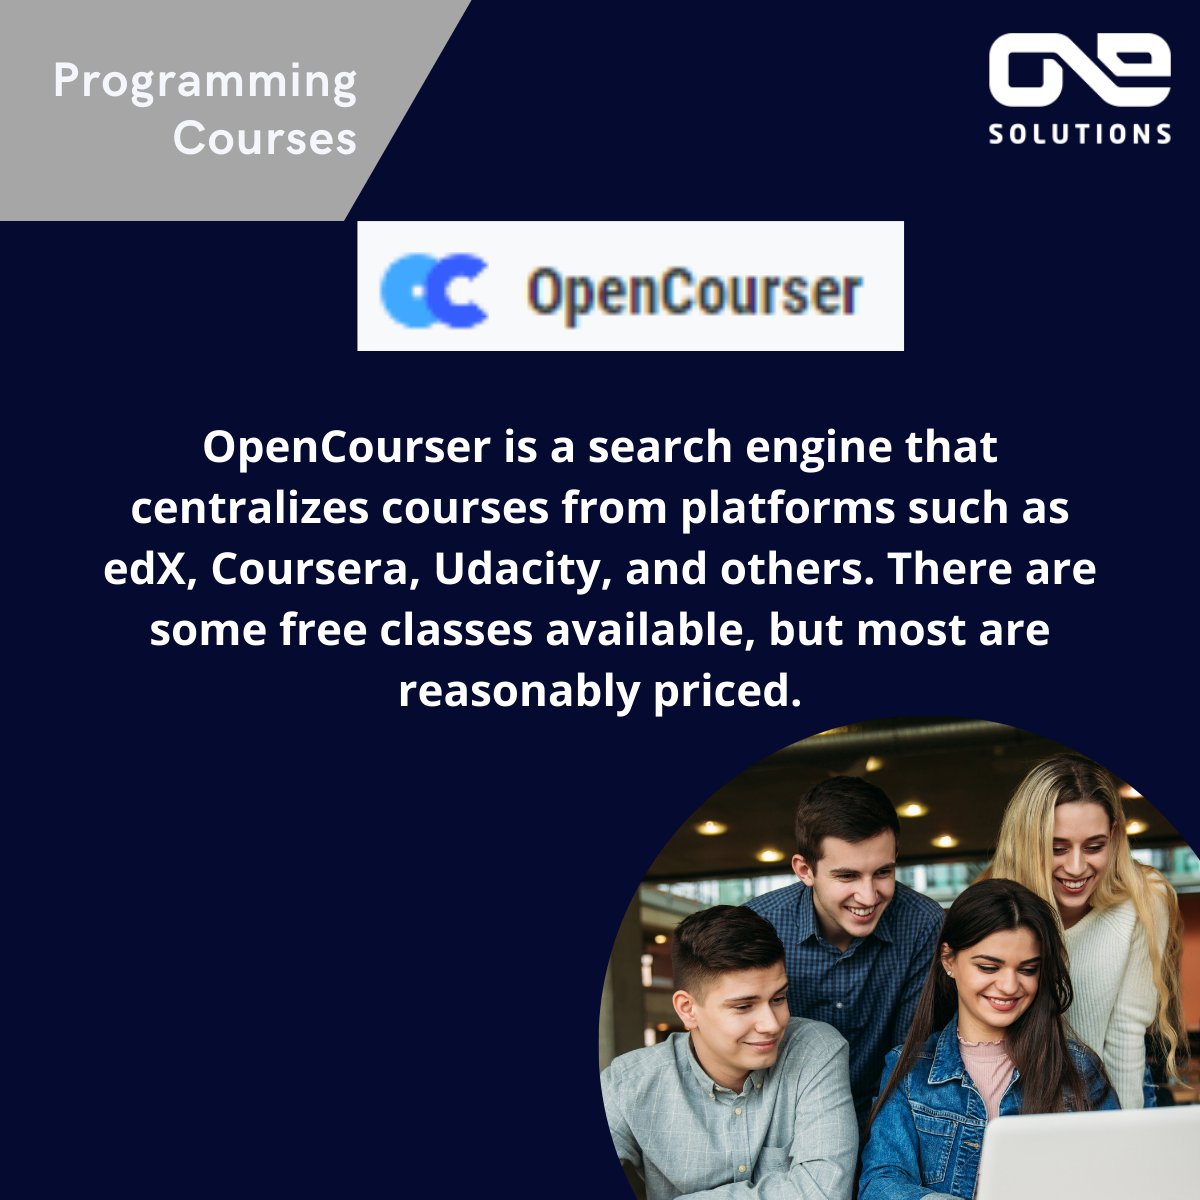 Programming courses⌨️🖊️
Like 👍 and Share  this post to your friends.
#freecoursesonline #onesolutionsweb #softwaredevelopment #outsourcing #outsourcingservices #geek #computerscience #coding #codingbootcamp #fullstackdeveloper #softwareengineer #softwaredeveloper